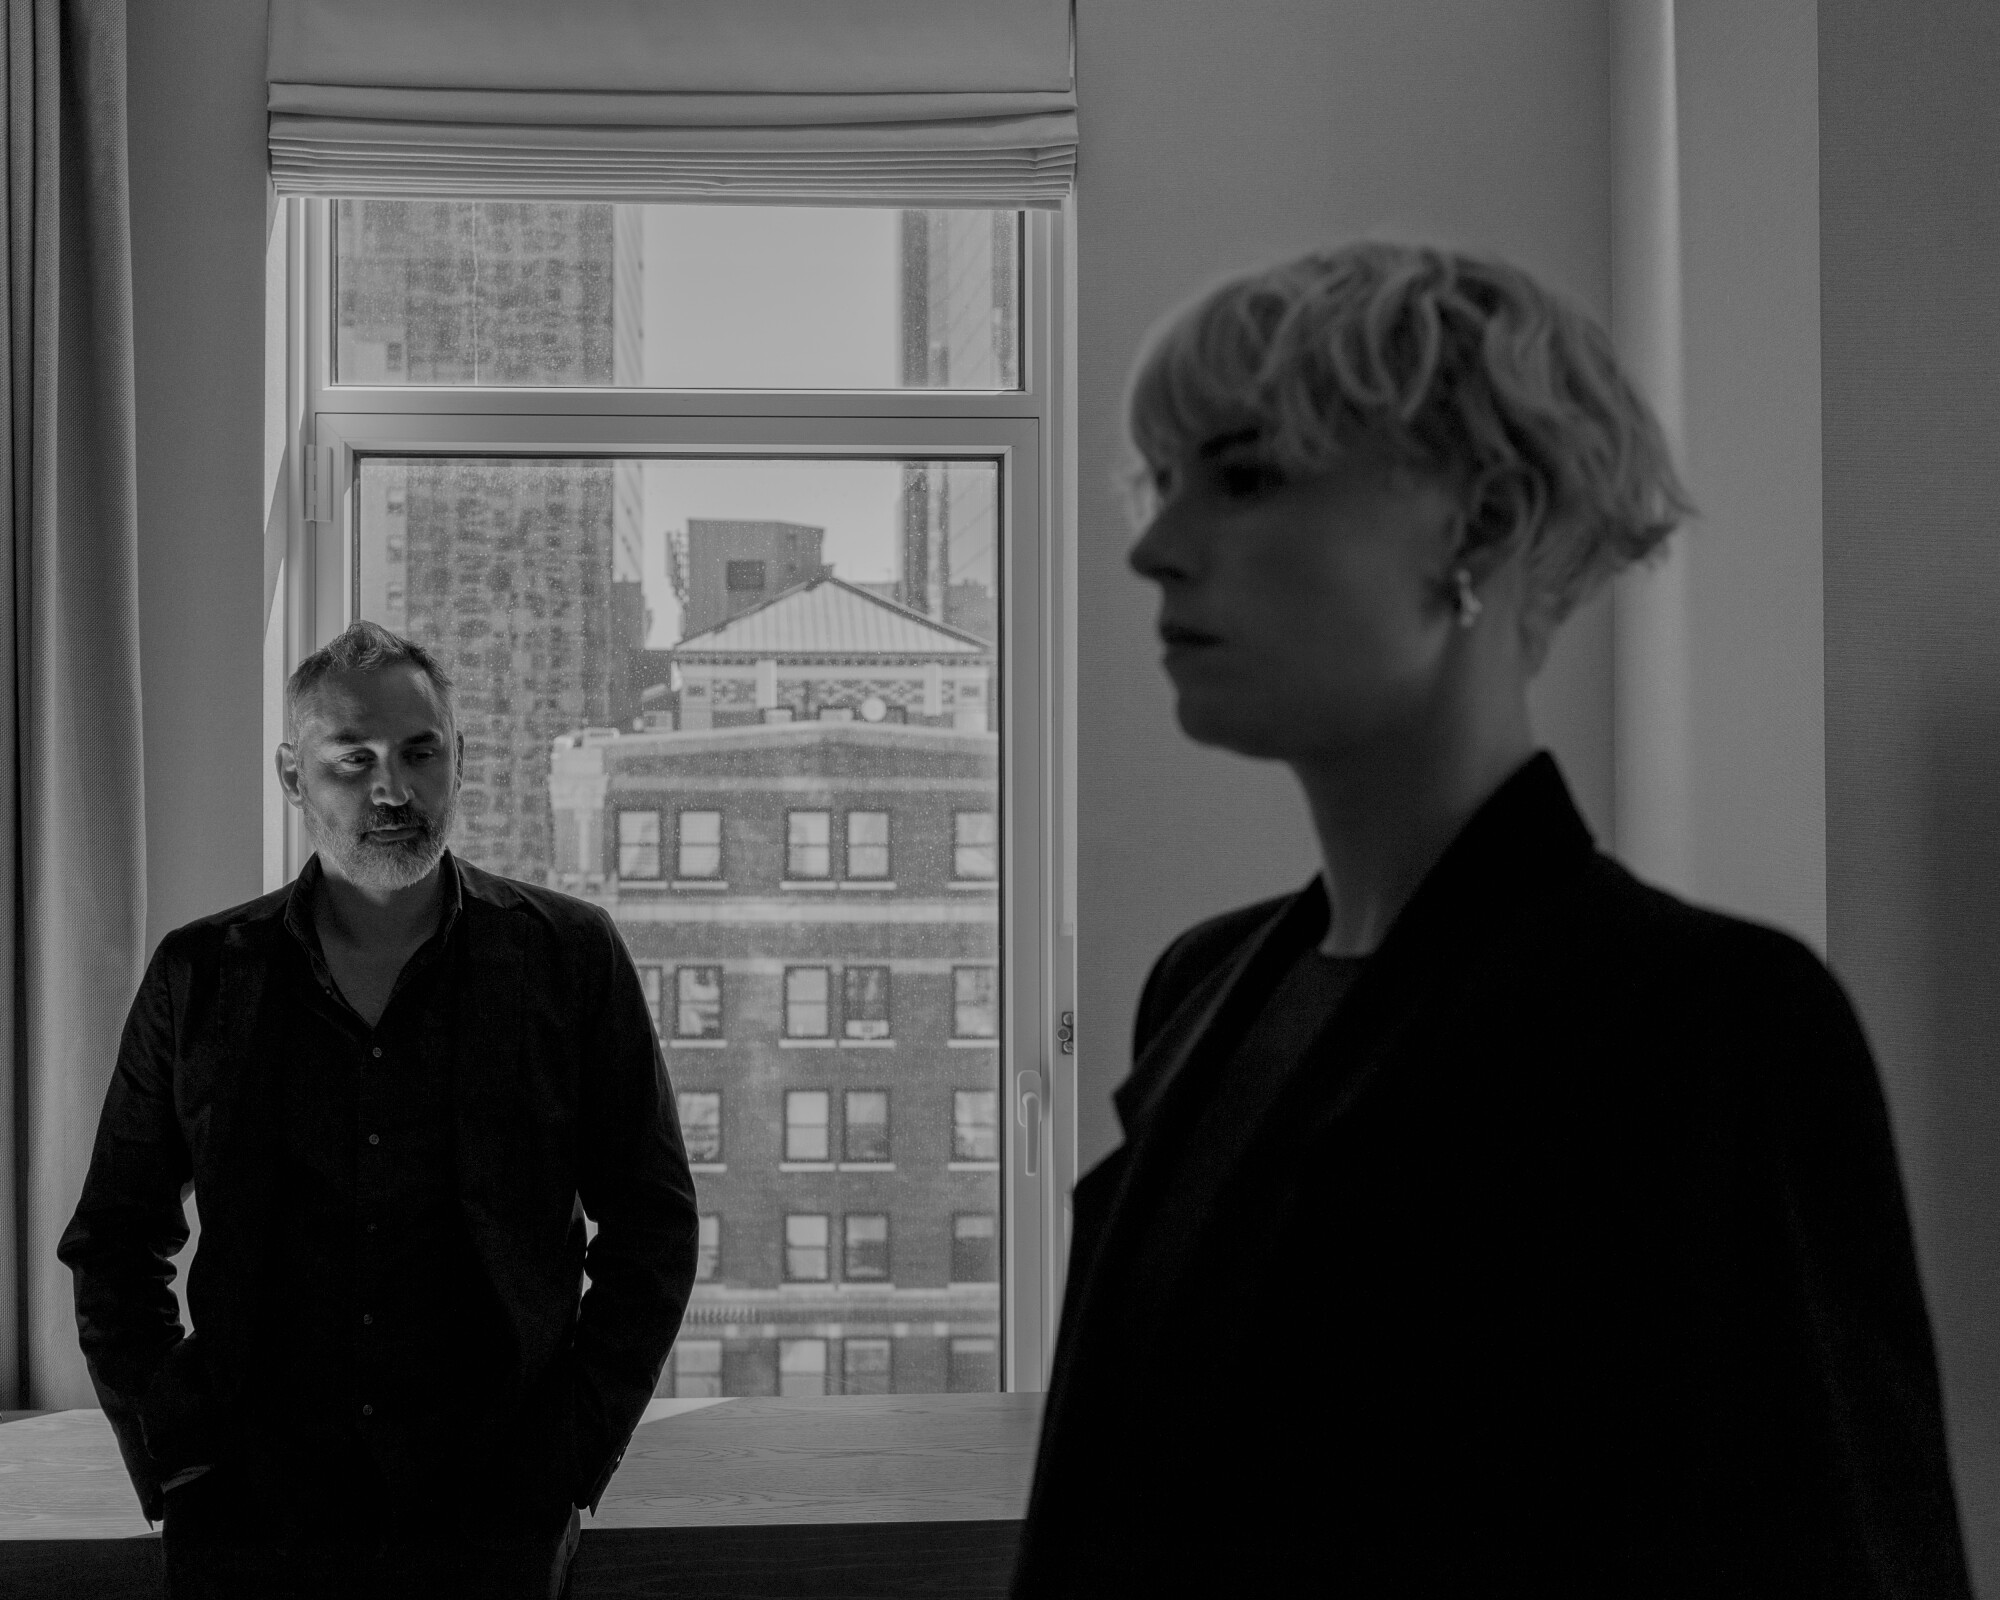 Two people in black stand near a window.